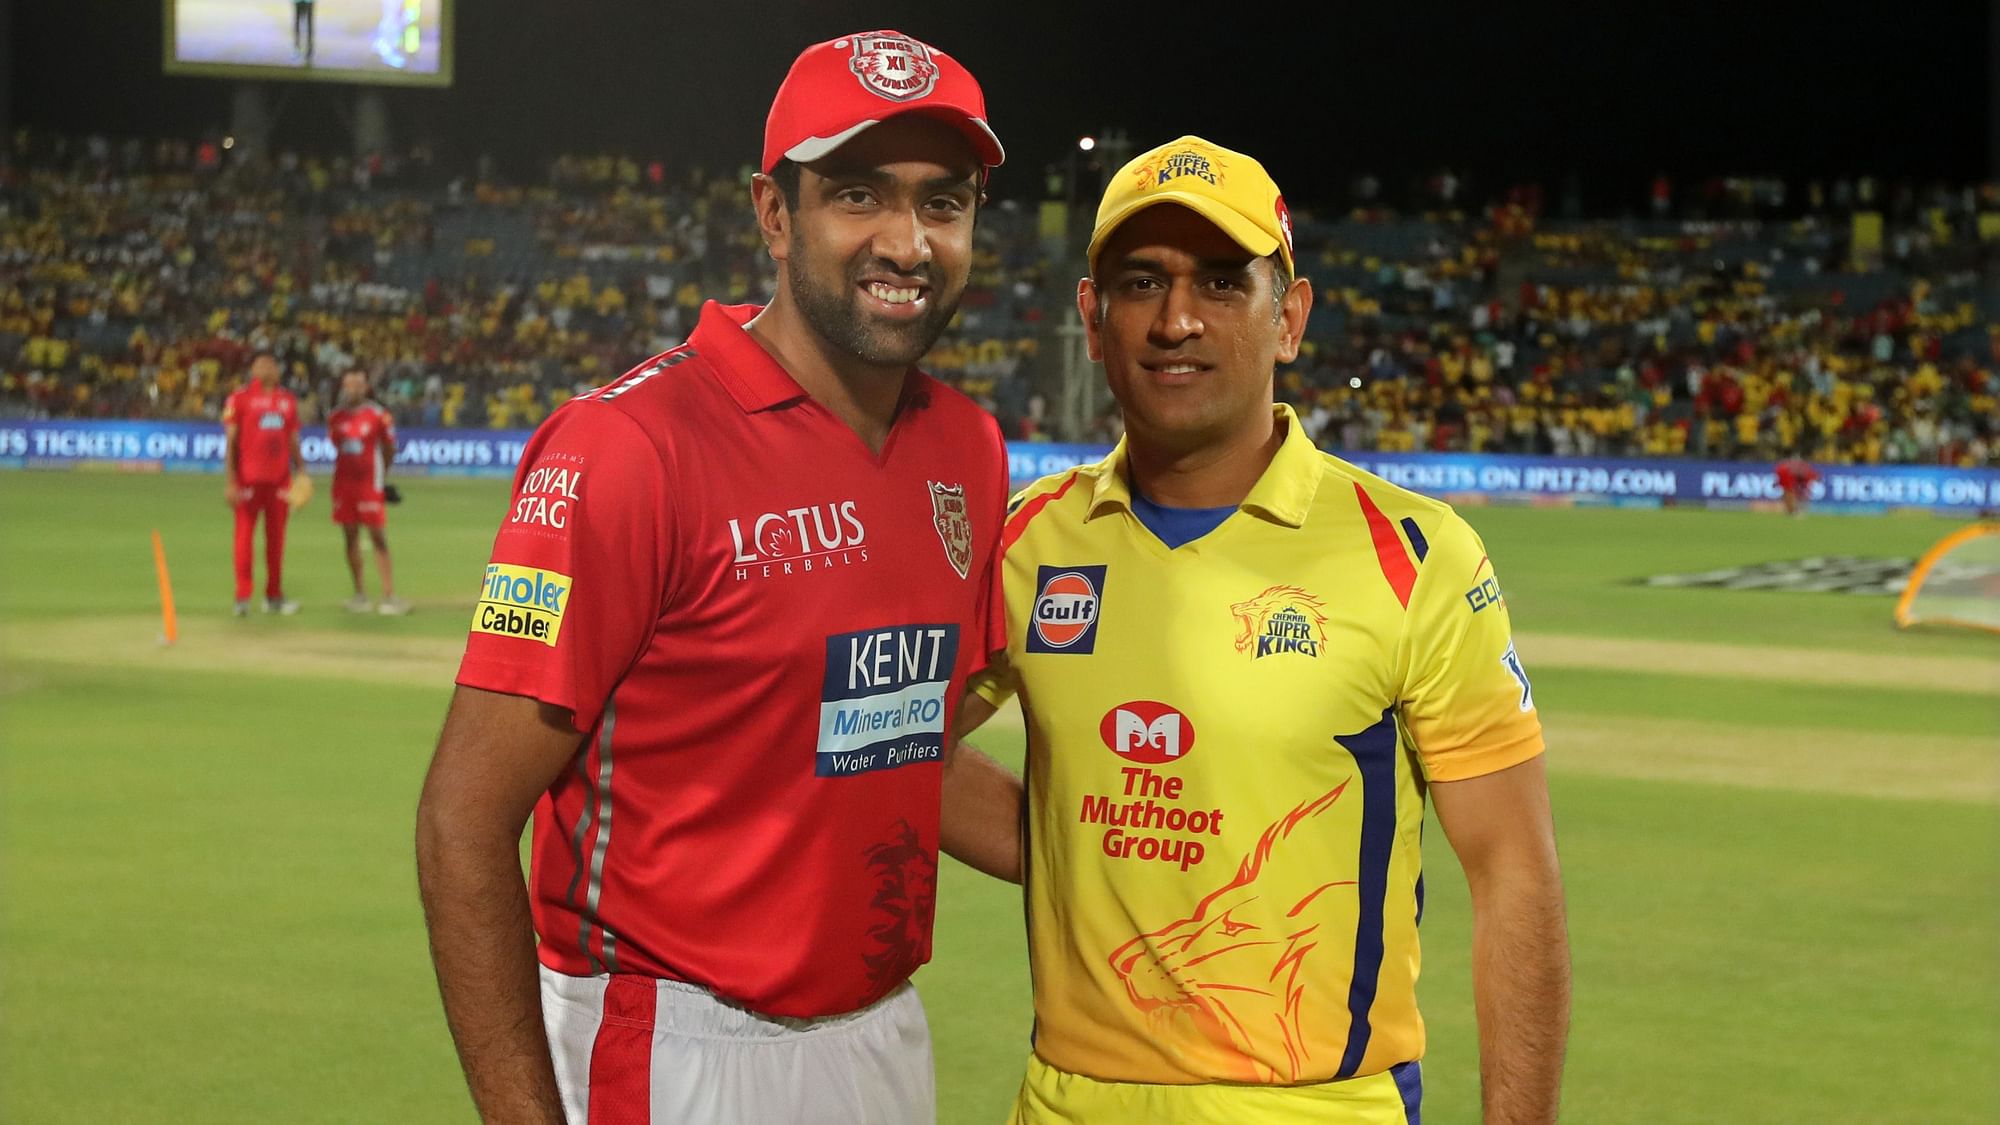 Indian cricketers MS Dhoni and Ravichandran Ashwin are training young cricketers online through coaching programmes at their academies.